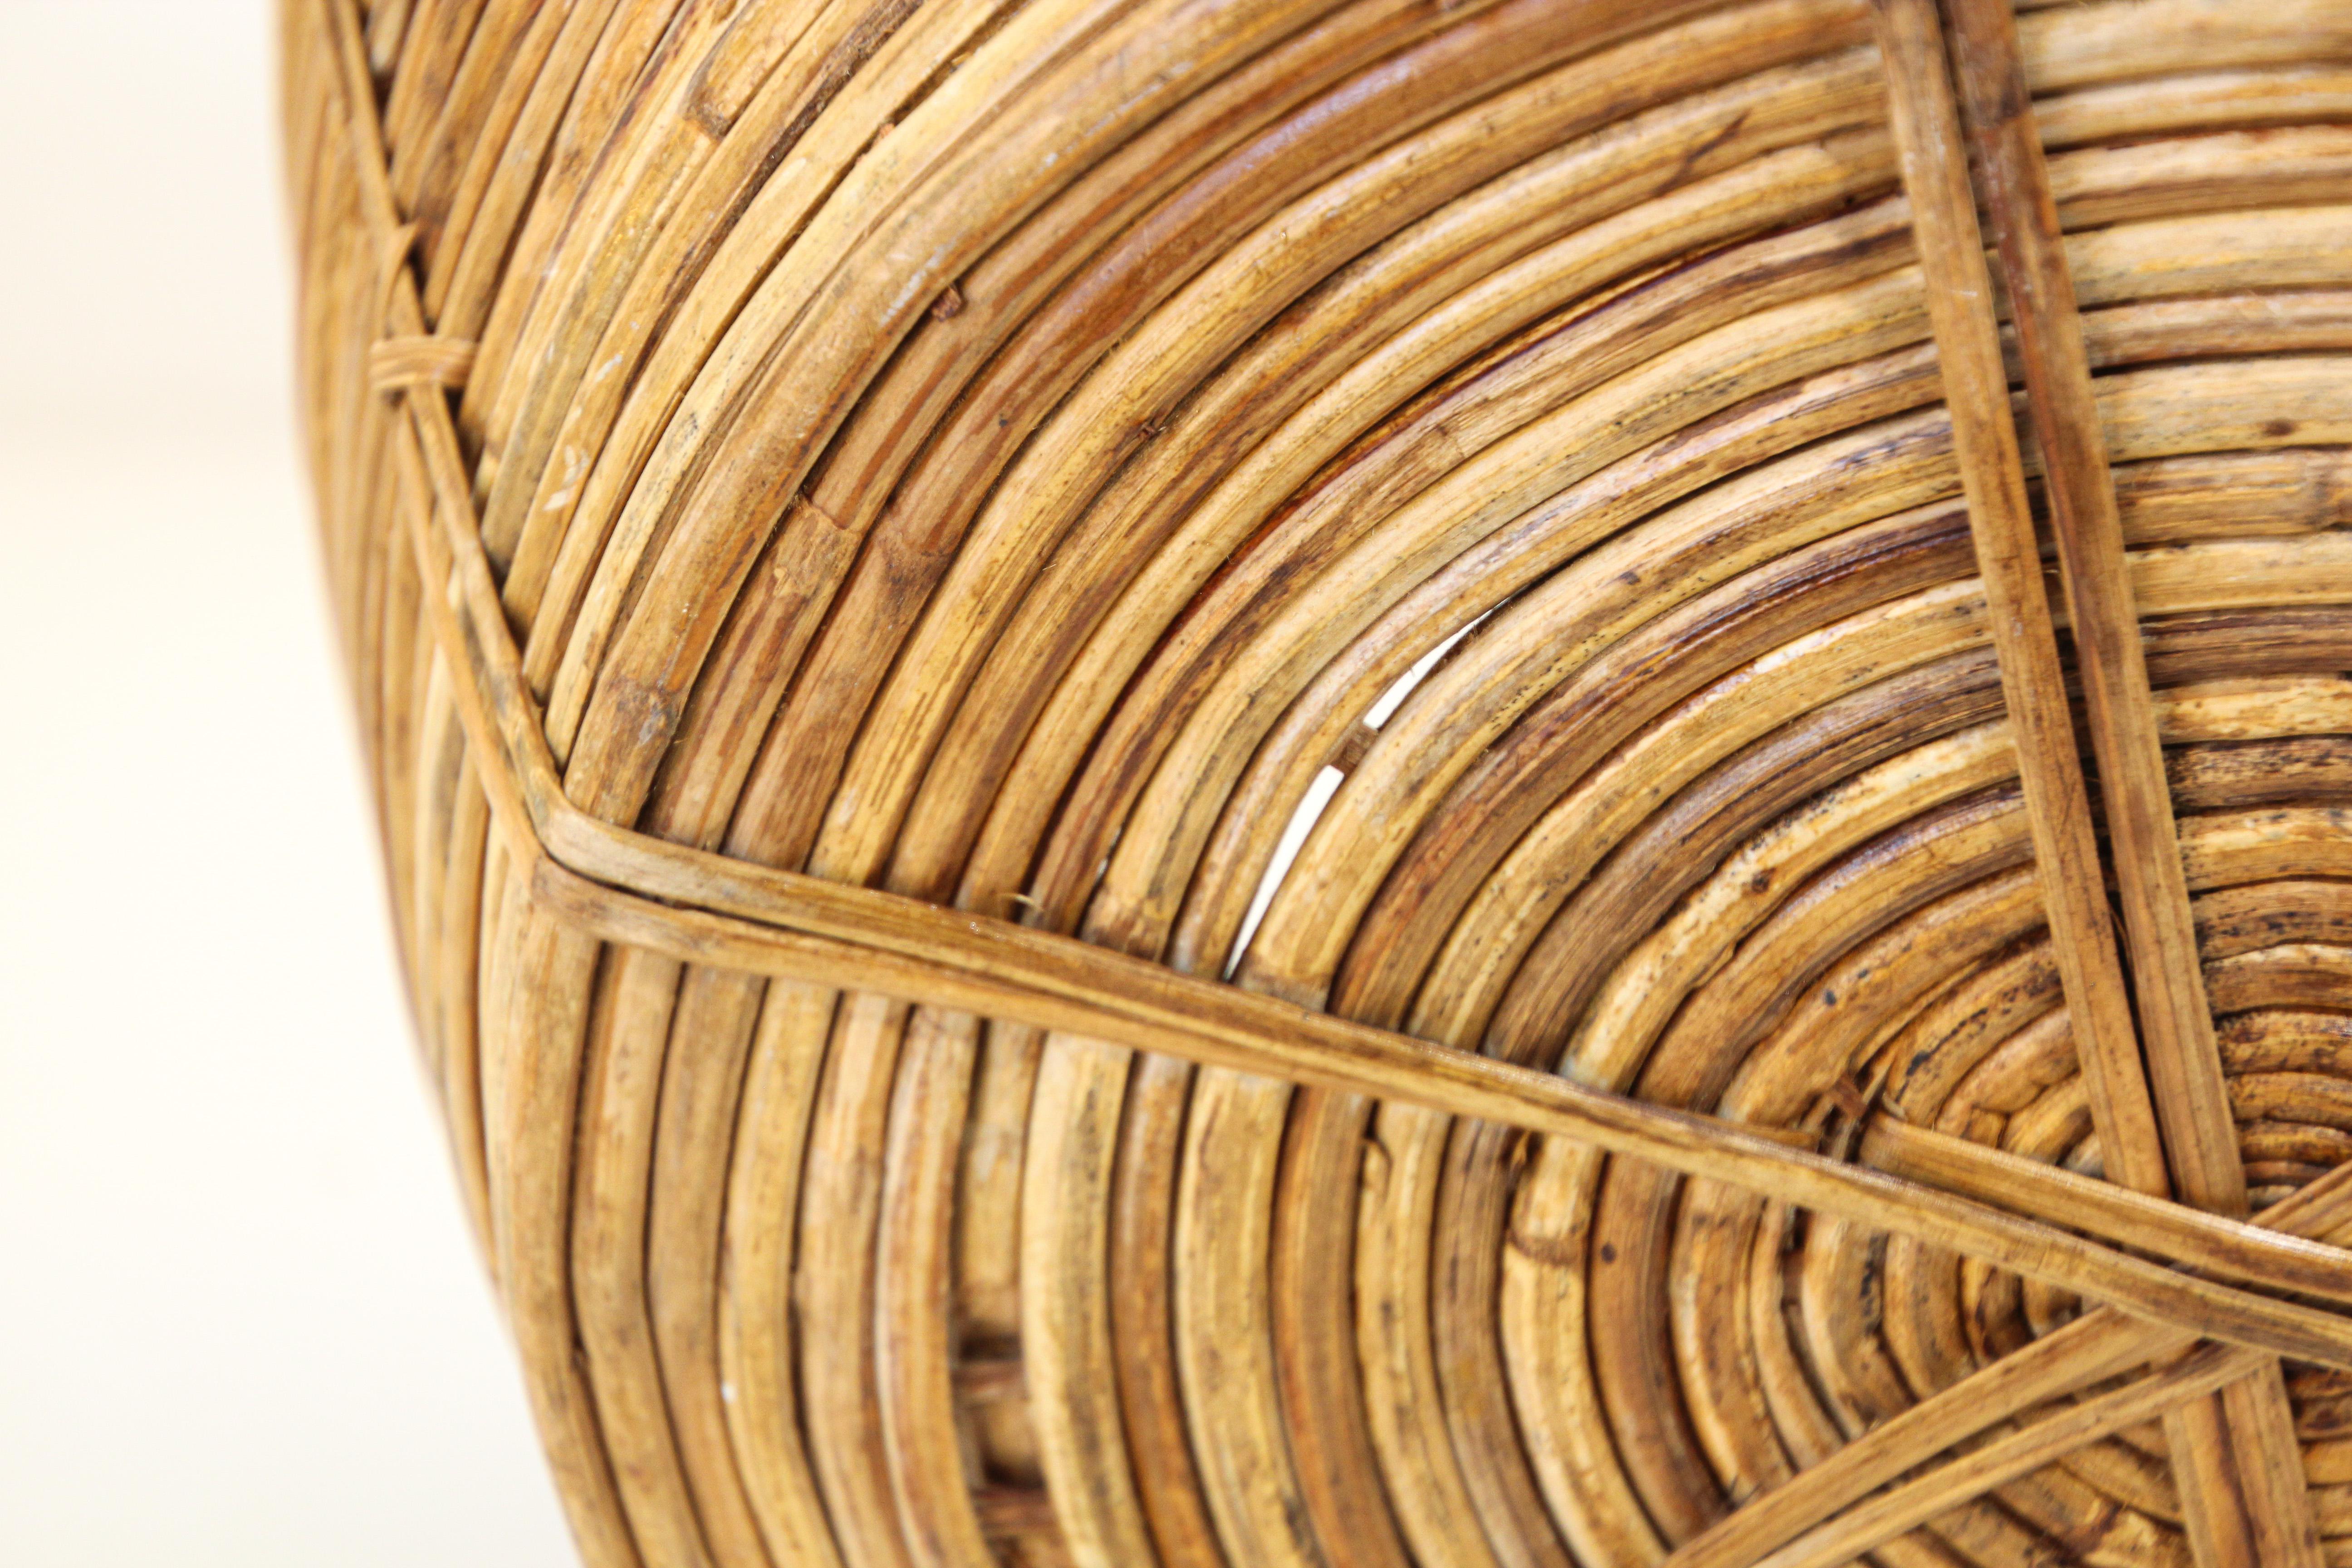 Hand-Crafted Large Brass and Rattan Bamboo Planter or Basket